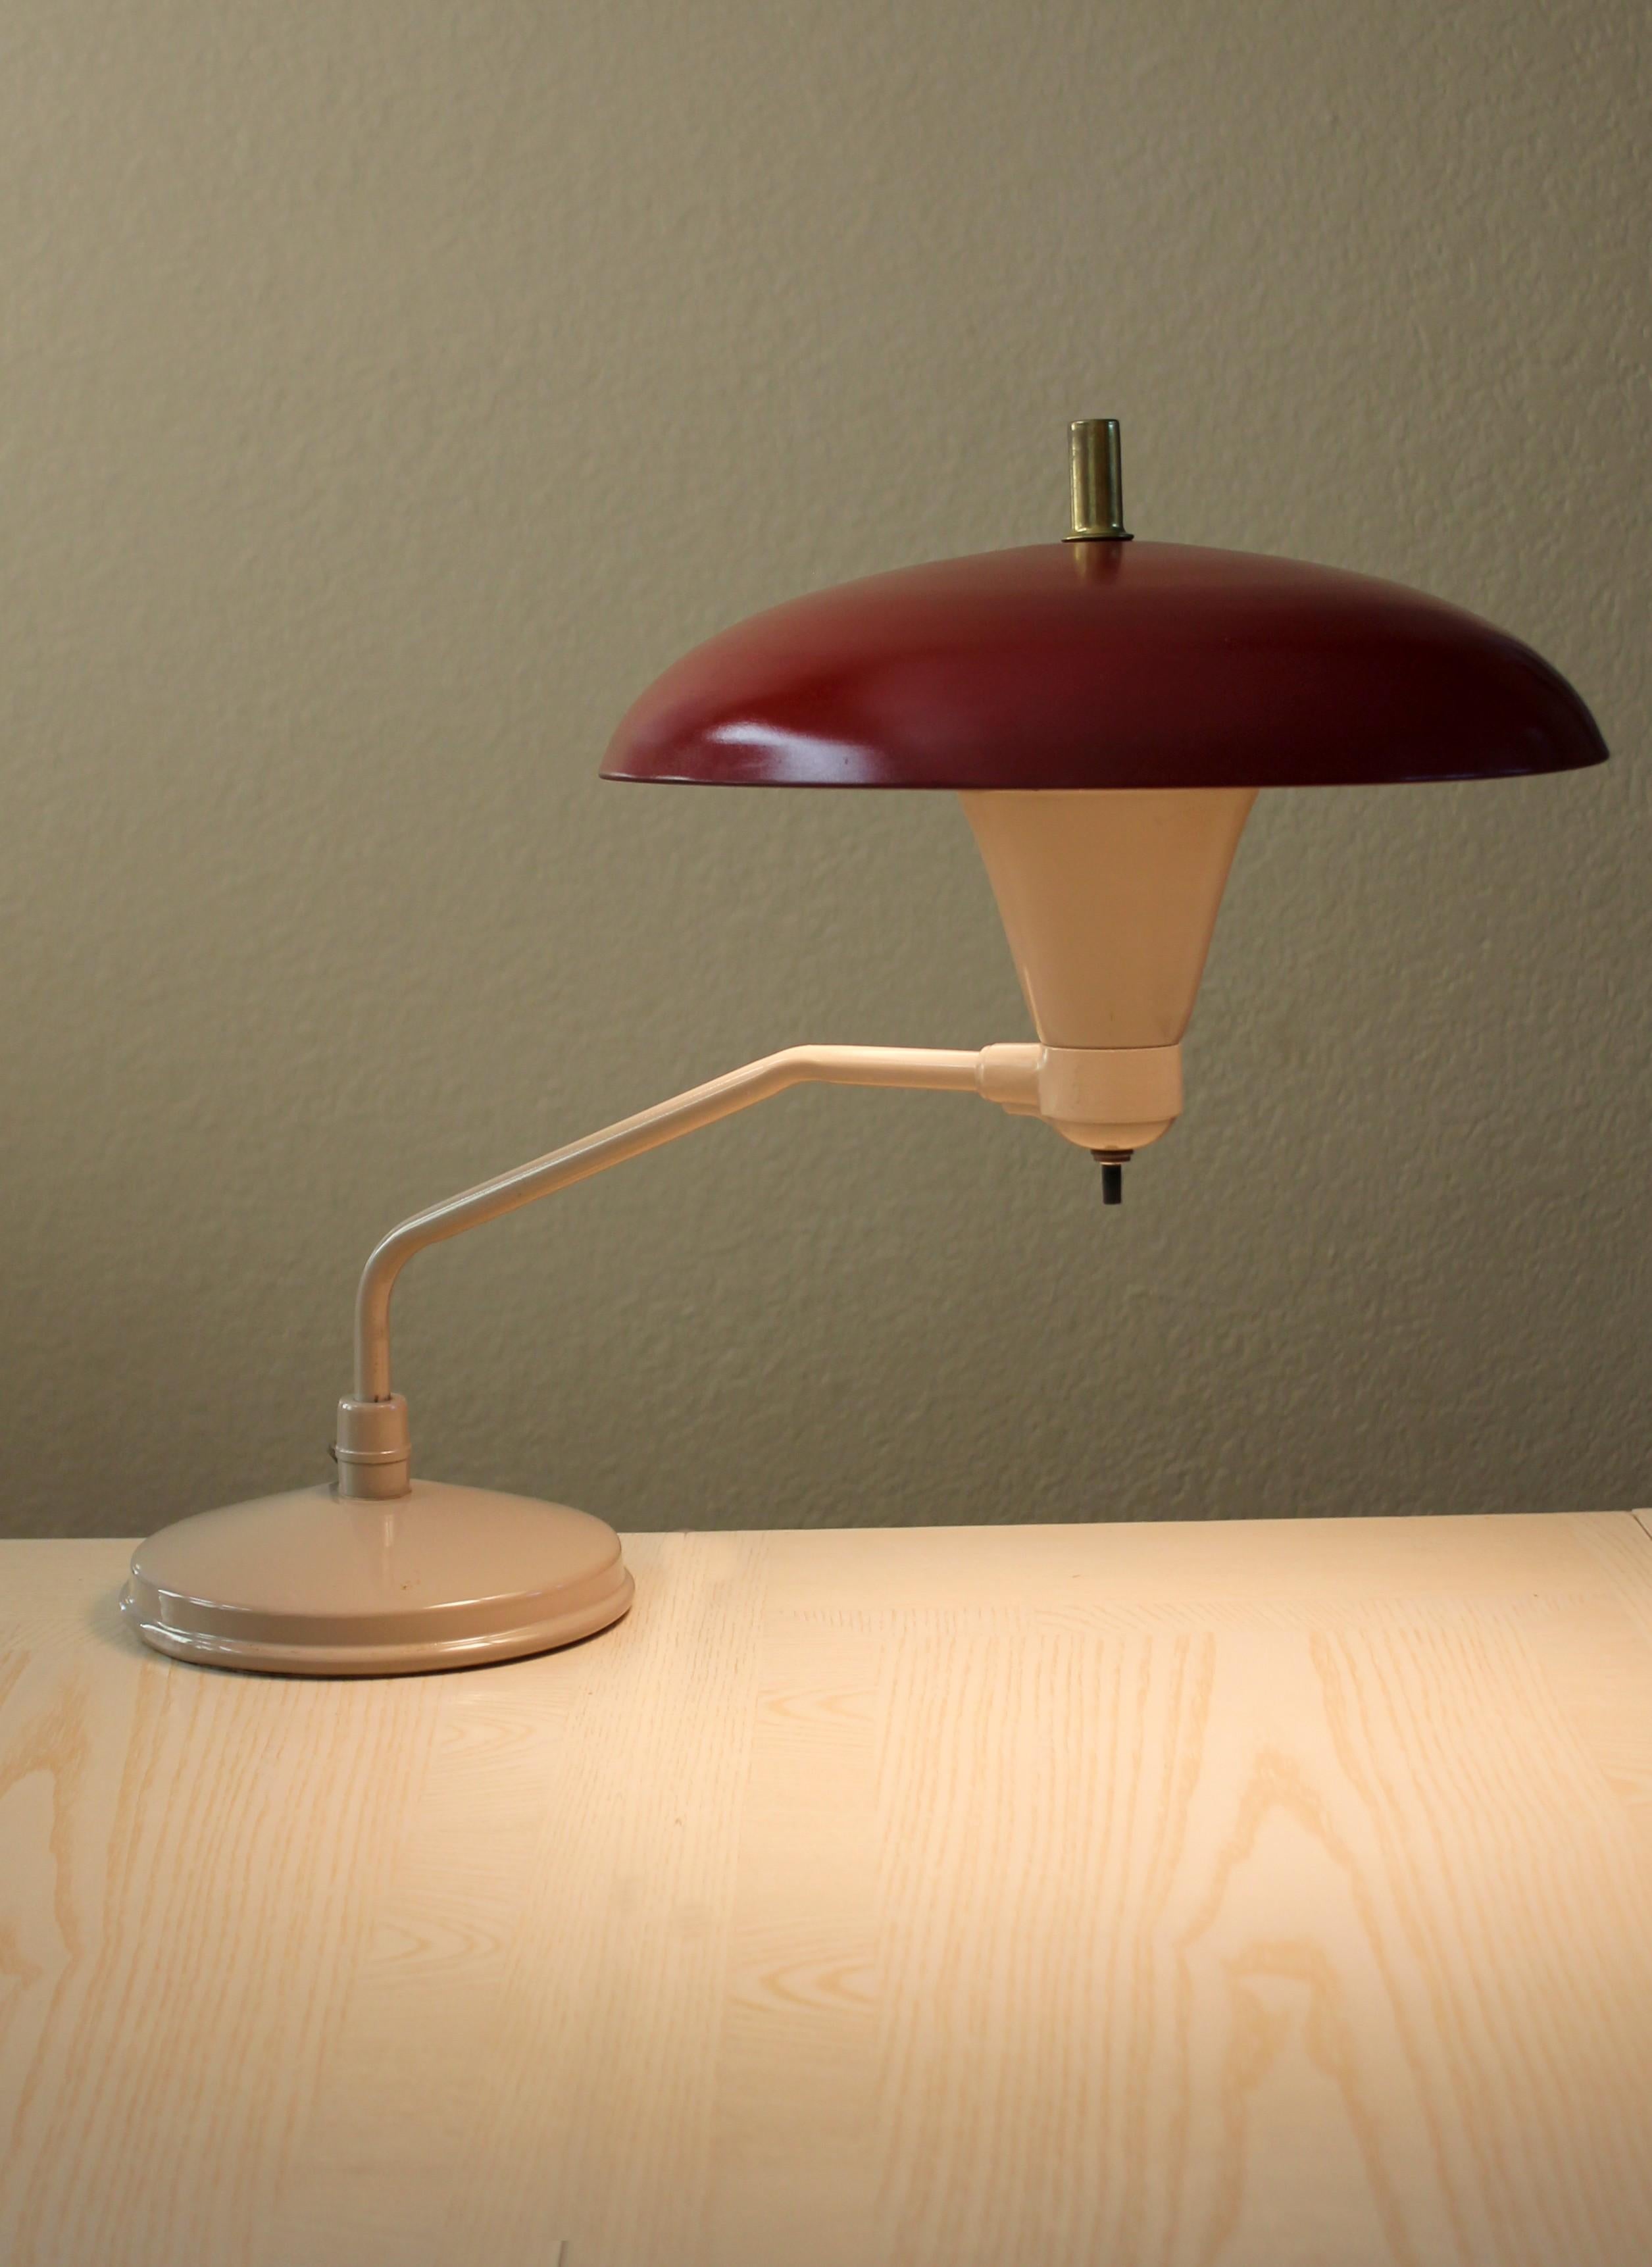 Mid Century Modern Swing Arm Reflector Table Desk Lamp. Saucer Rare 50s Lighting In Good Condition For Sale In Peoria, AZ